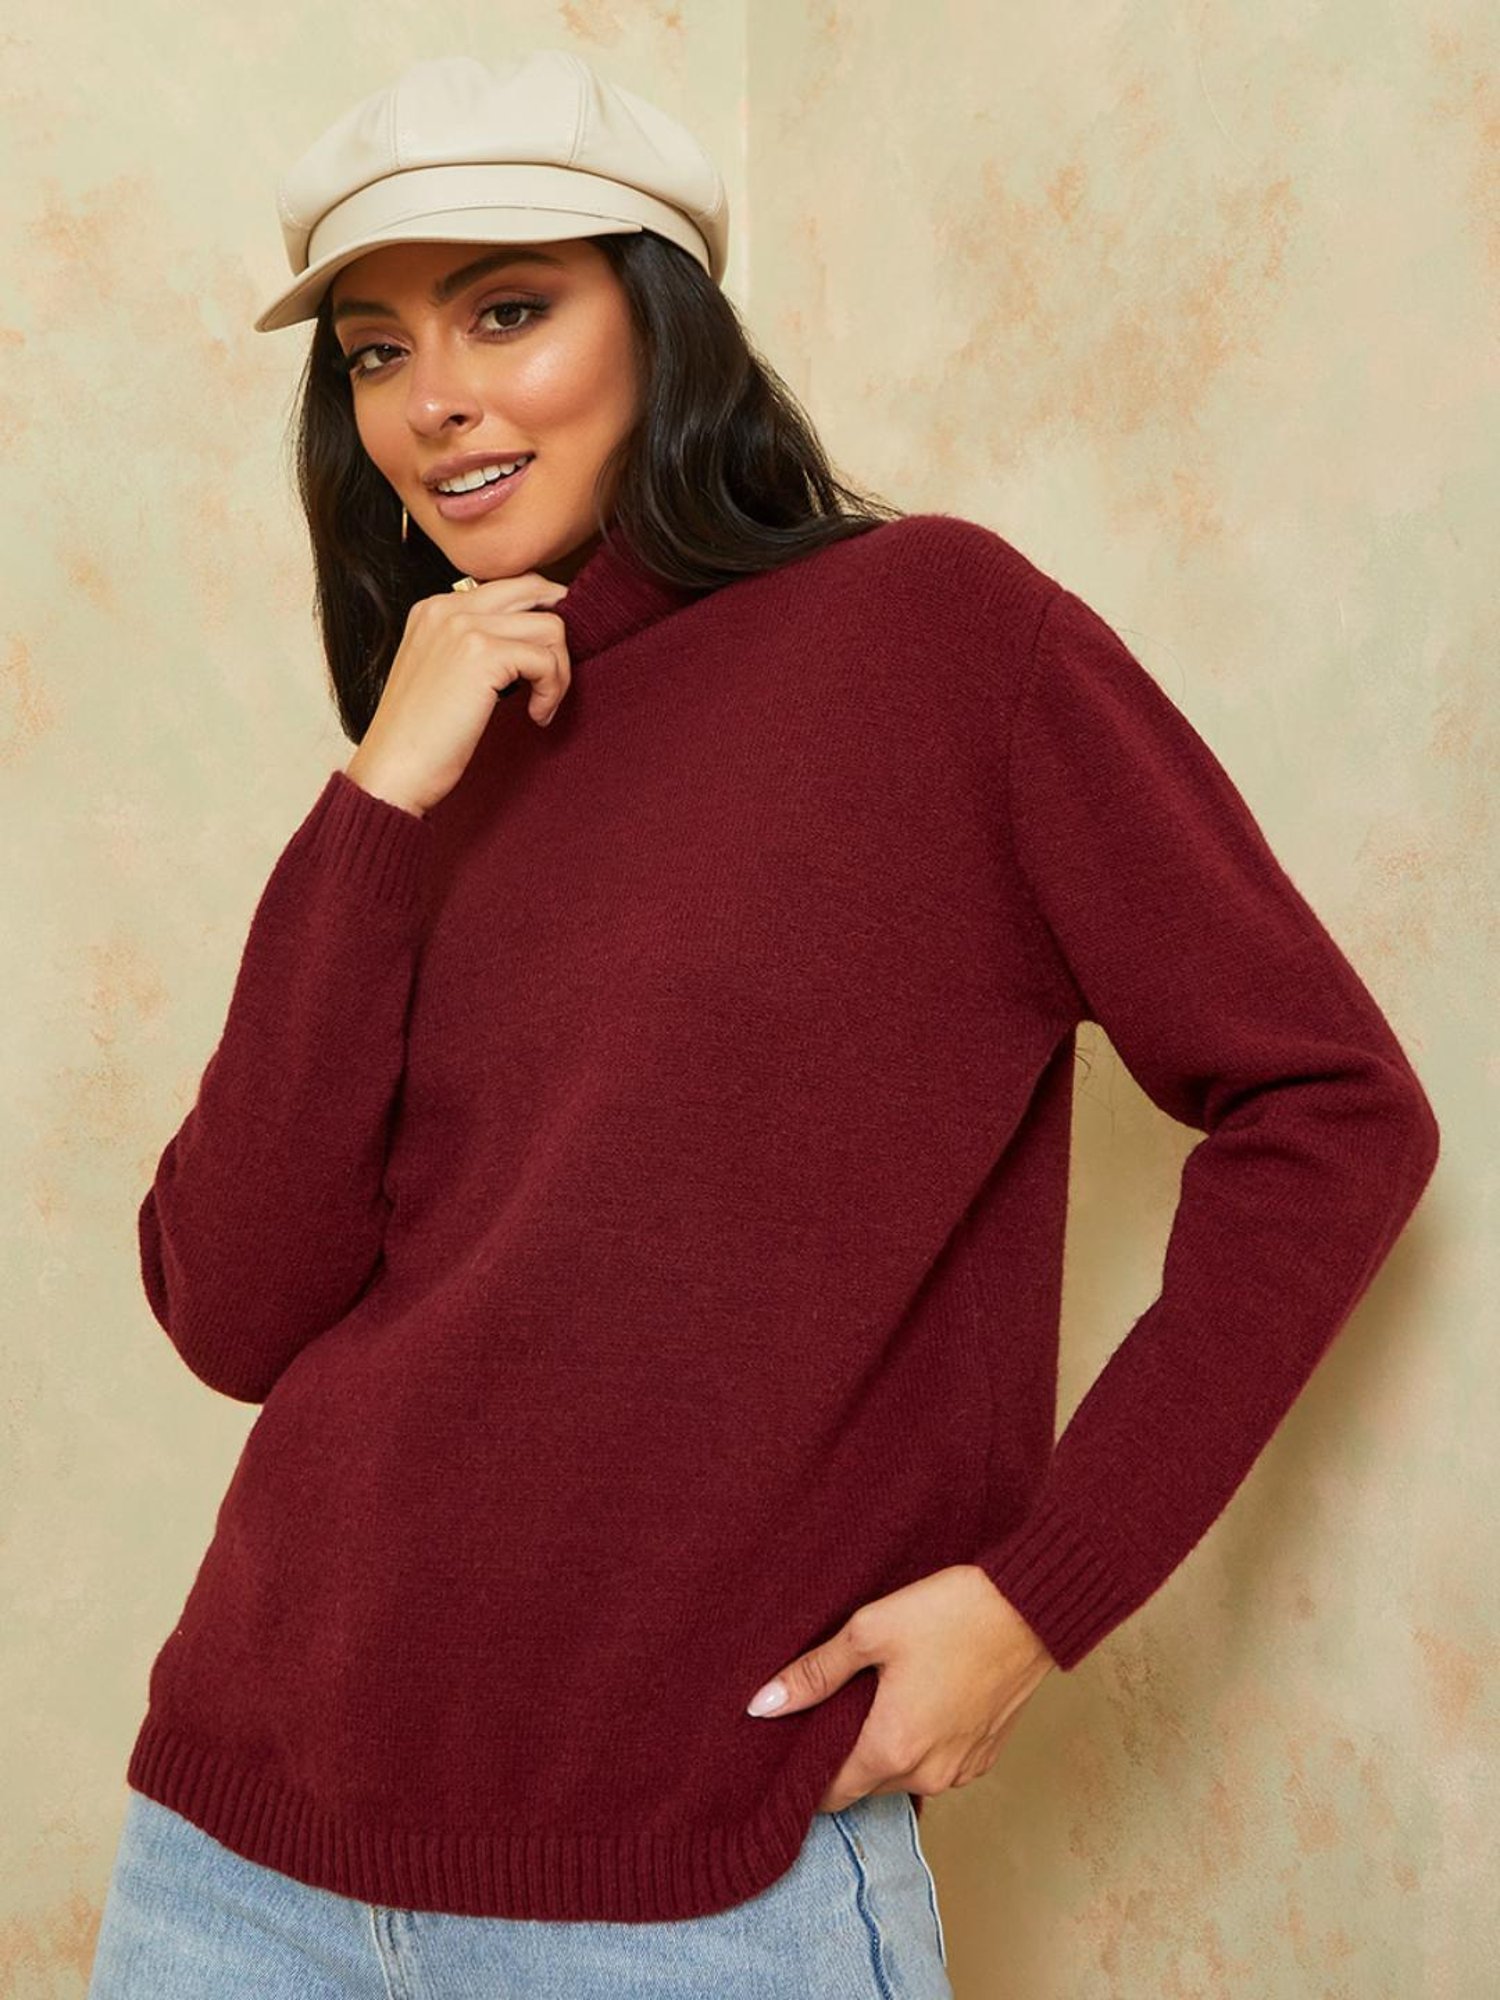 Styli Sweater : Buy Styli Red Turtle Neck Rib Fitted Sweater With Ruffle  Sleeves Online